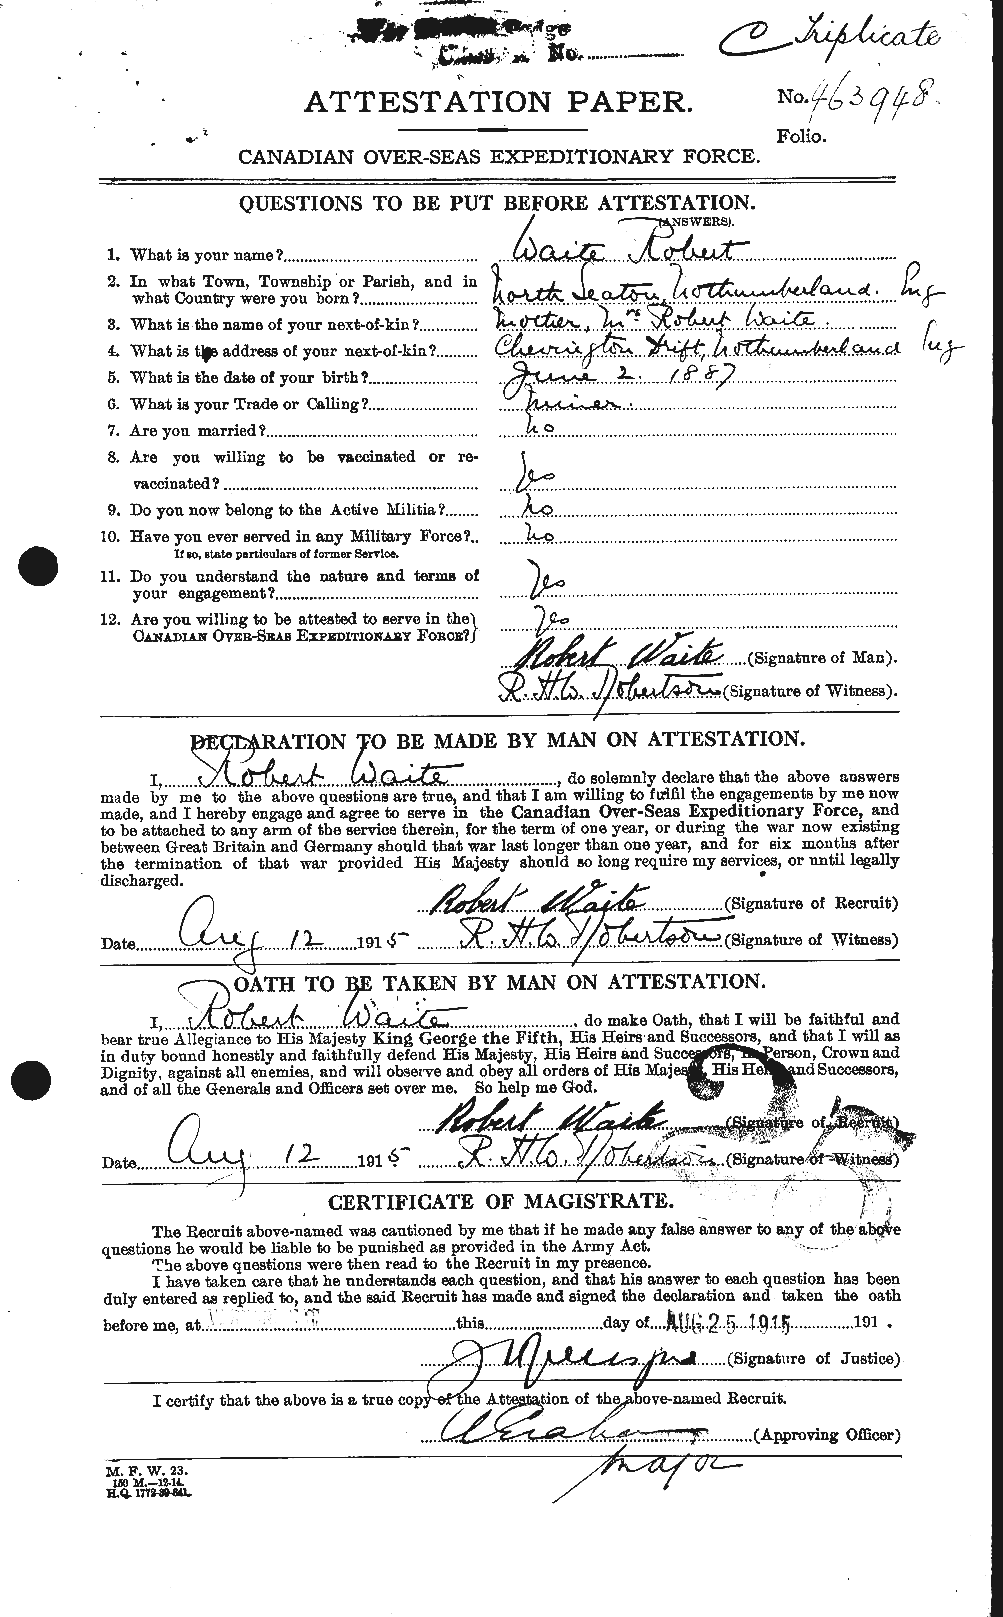 Personnel Records of the First World War - CEF 654299a